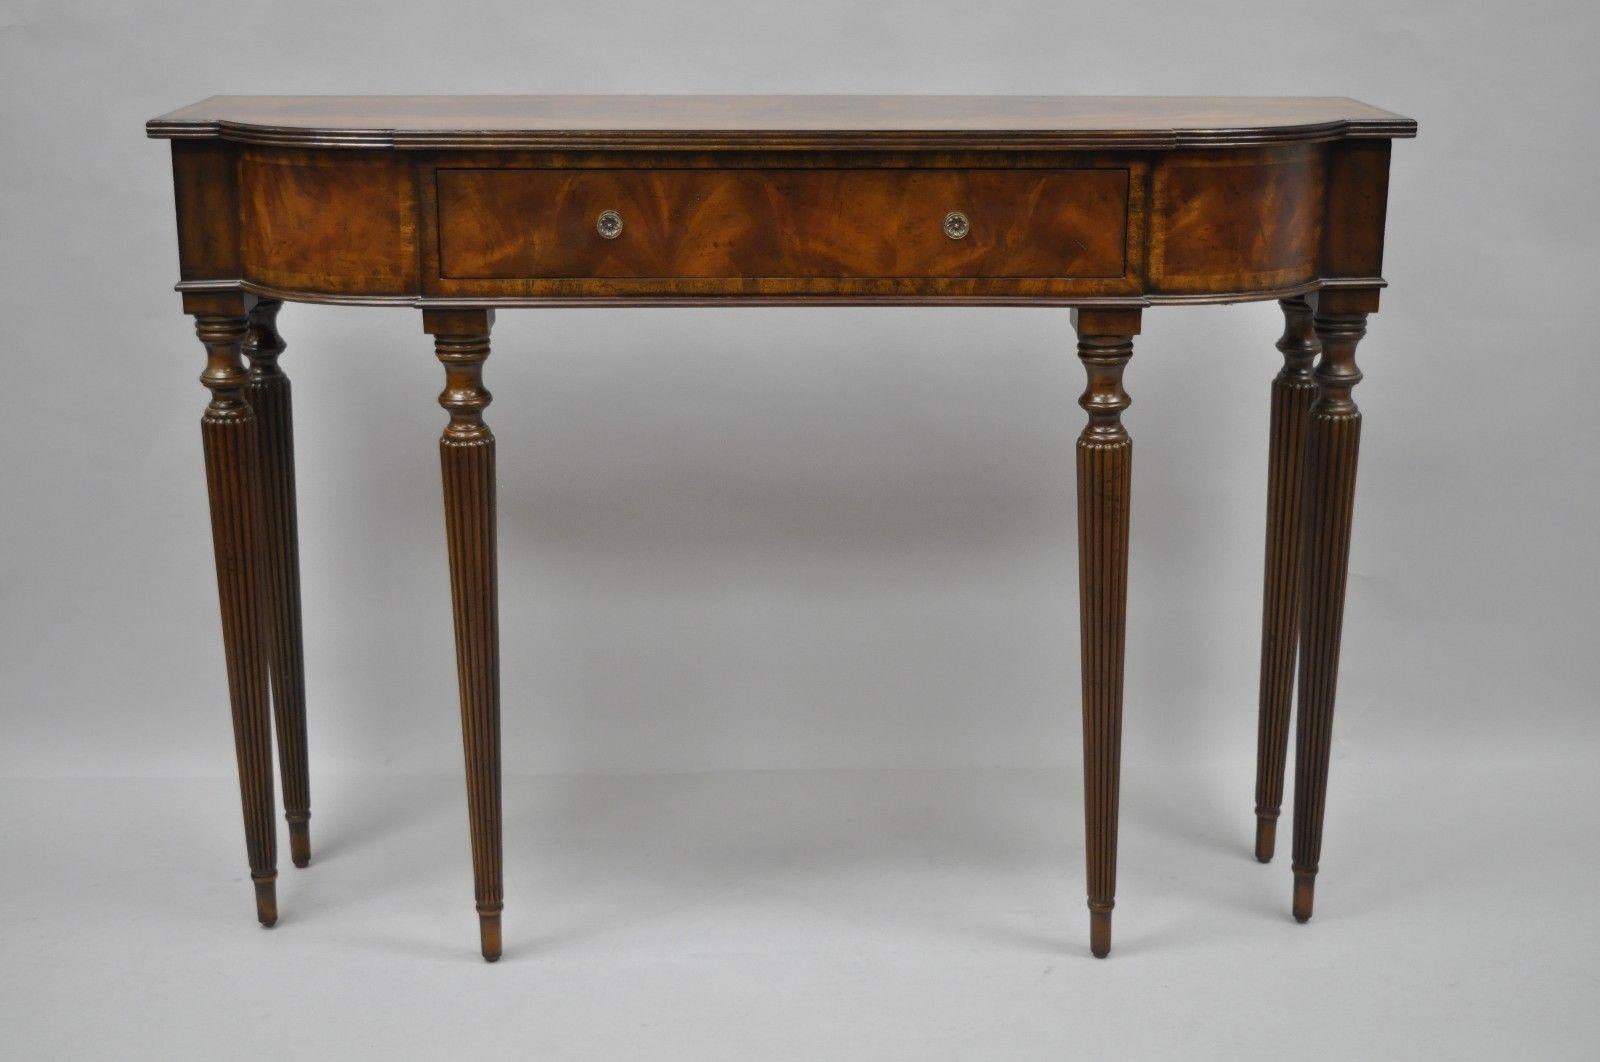 Maitland Smith Regency / Sheraton style mahogany console table. Item features wood construction, single drawer, slender tapered legs, beautiful wood grain, original Maitland Smith labels. Maitland Smith retail price $1,935. 
Brackets to rear of